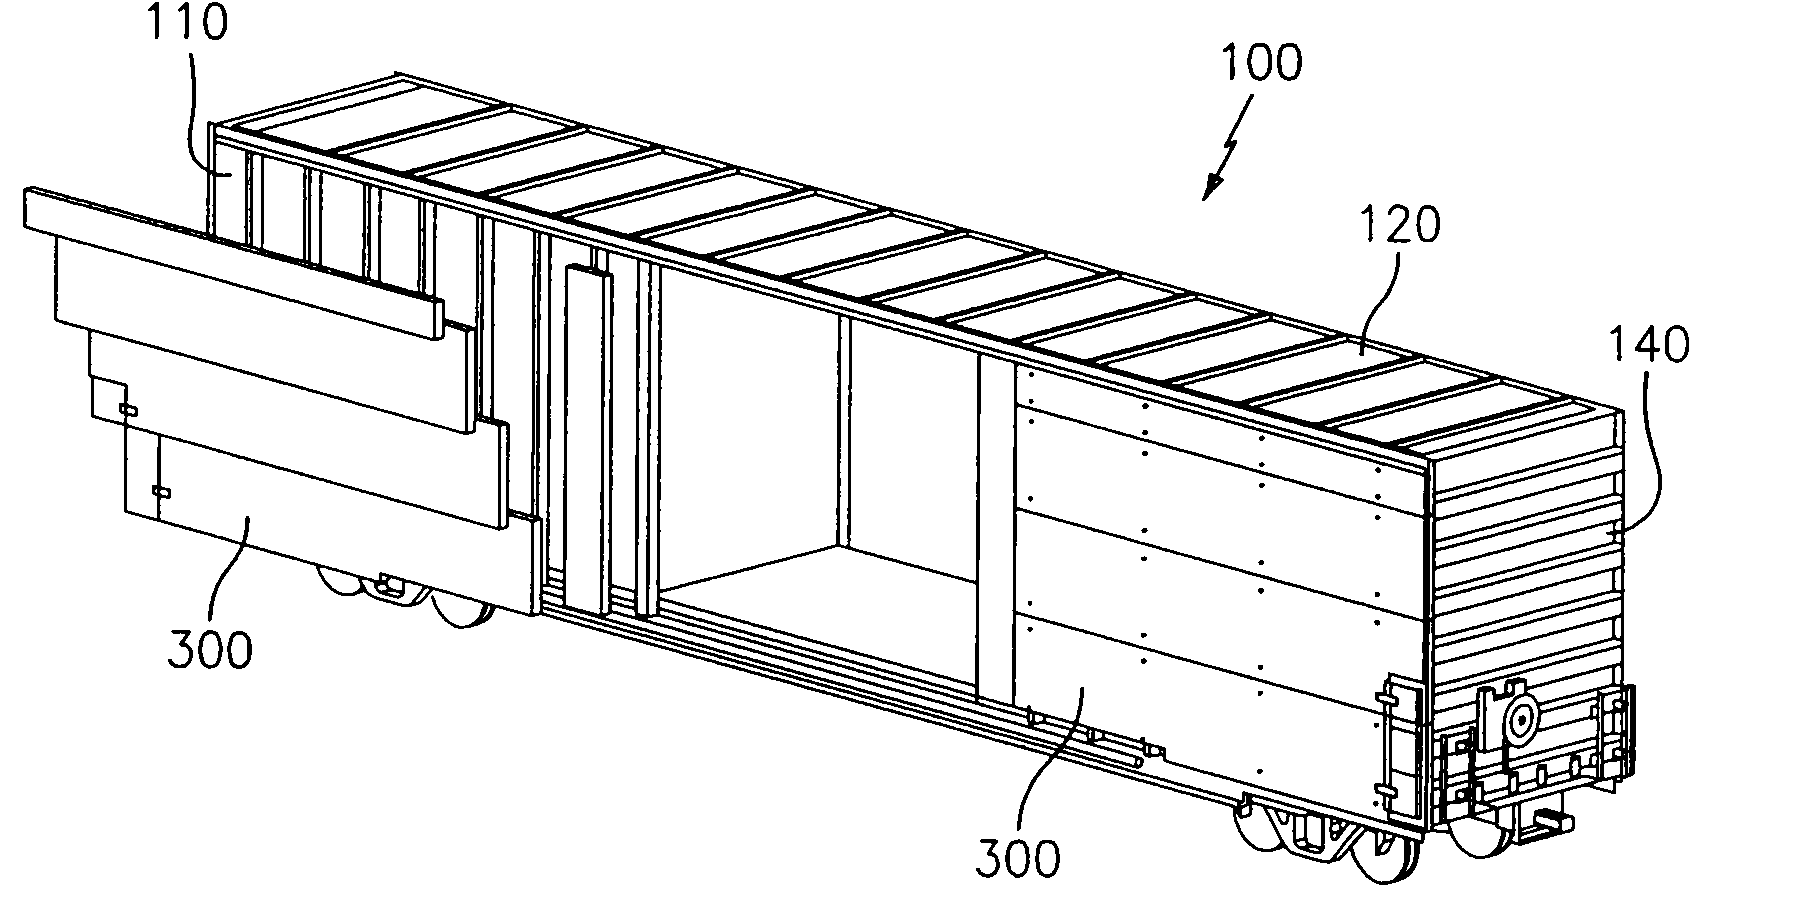 Insulated cargo container and methods for manufacturing same using vacuum insulated panels and foam insulated liners